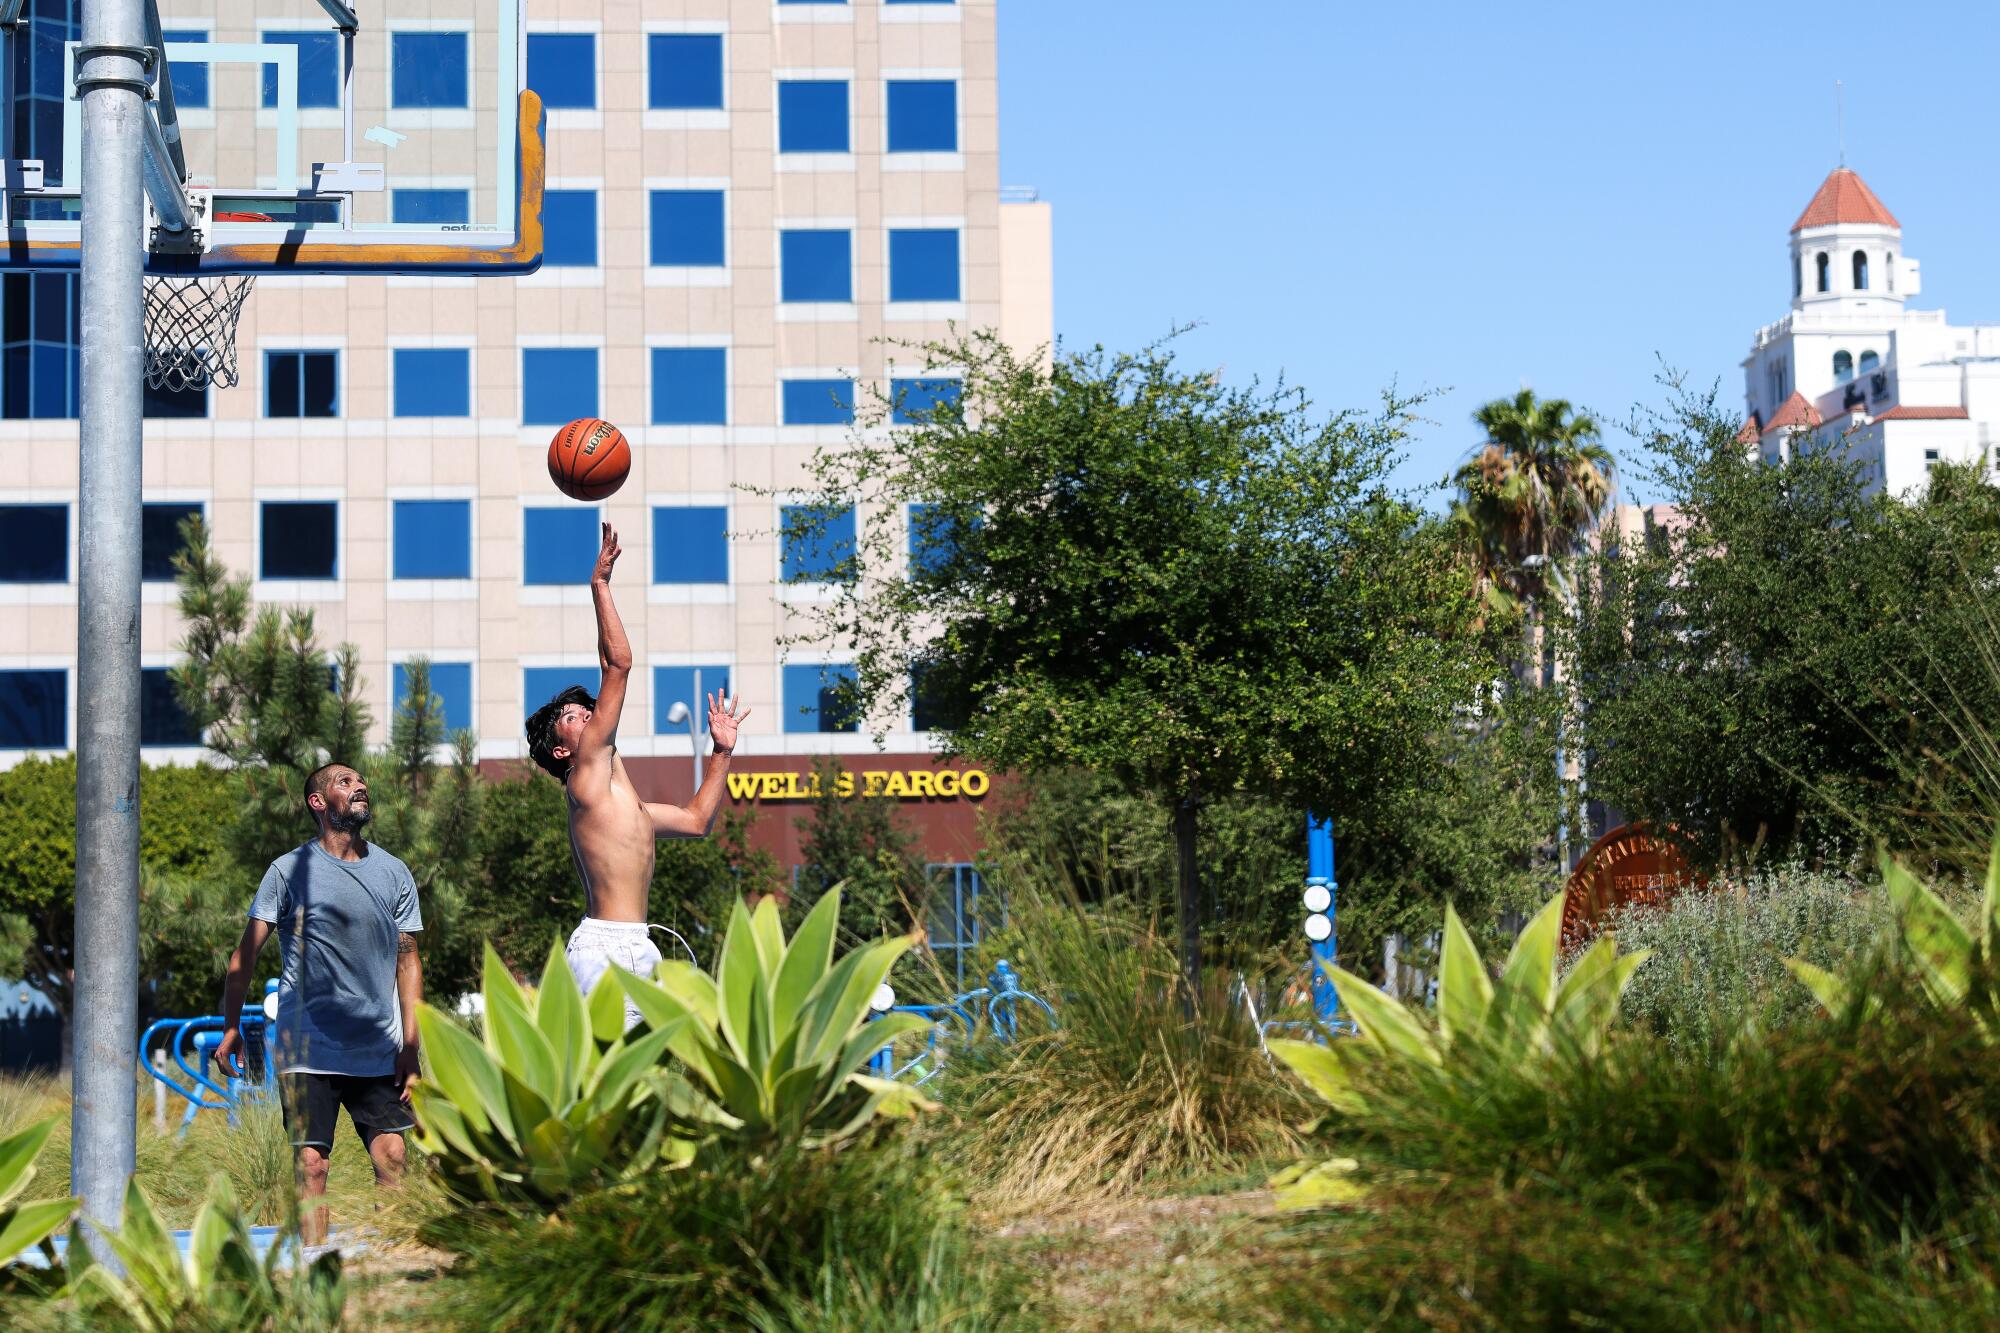 Two men play a game of basketball at Lincoln Park in downtown Long Beach.